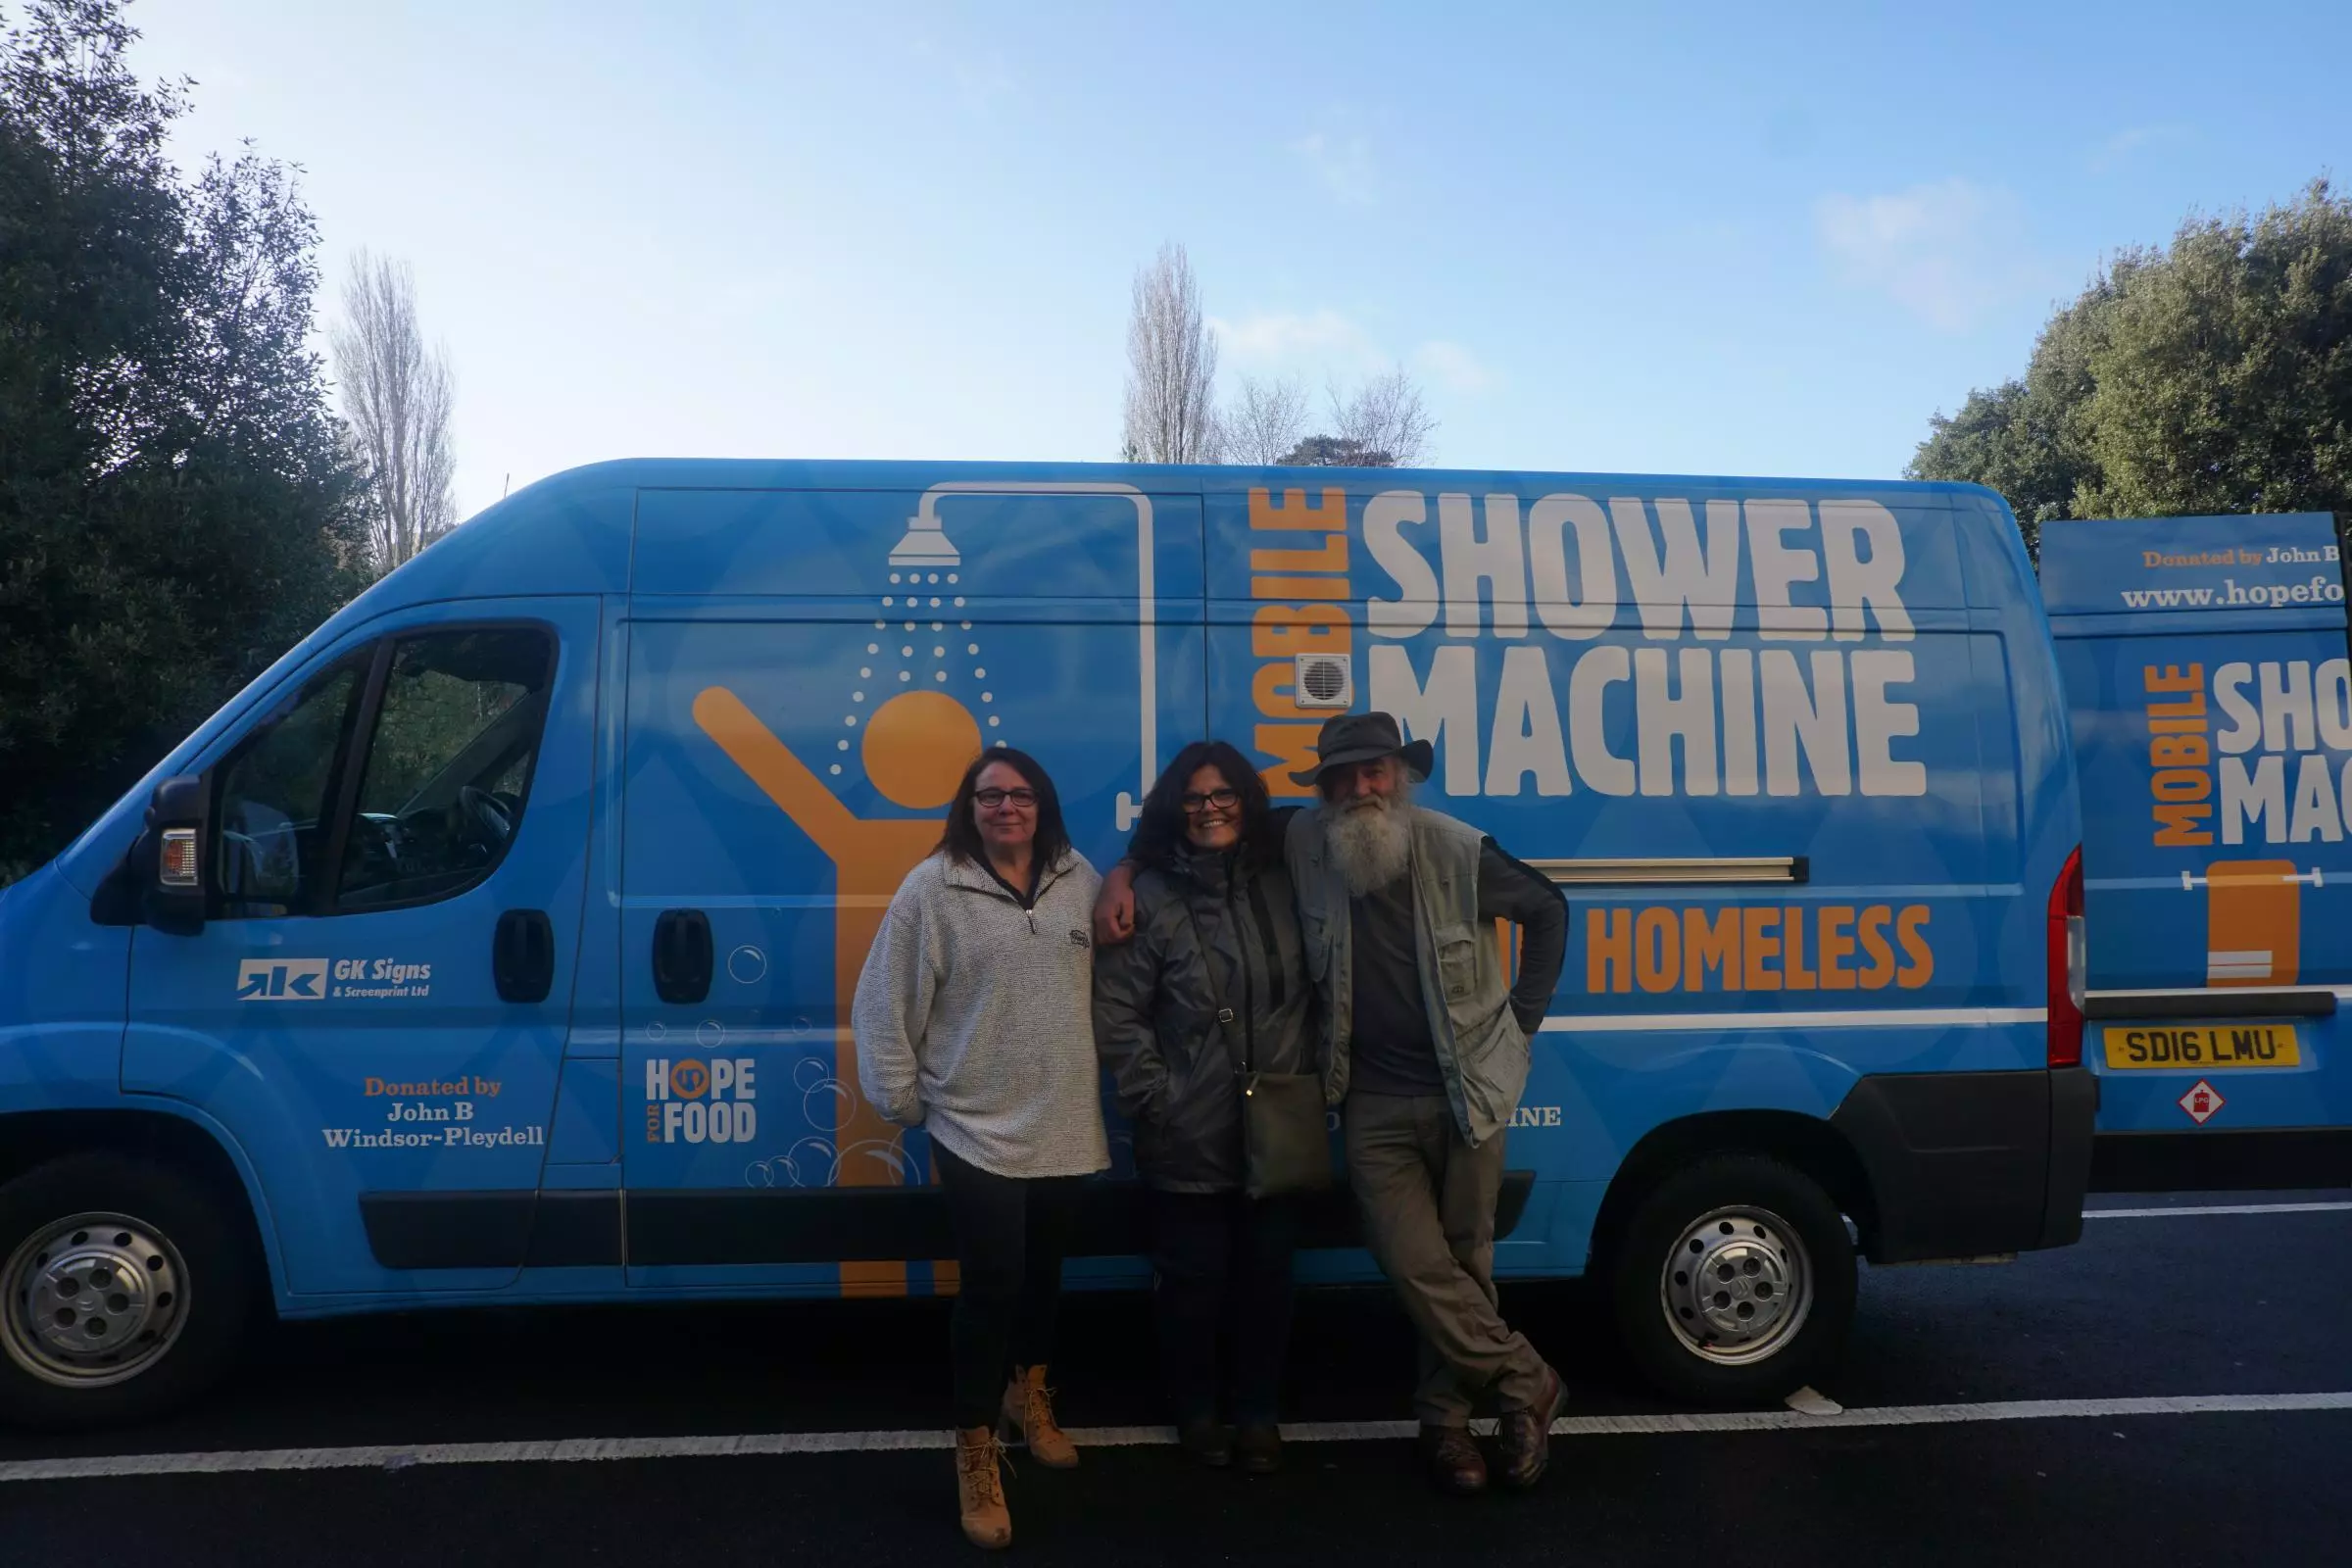 'The Shower Machine' will enable homeless people to wash while they clean their clothes.